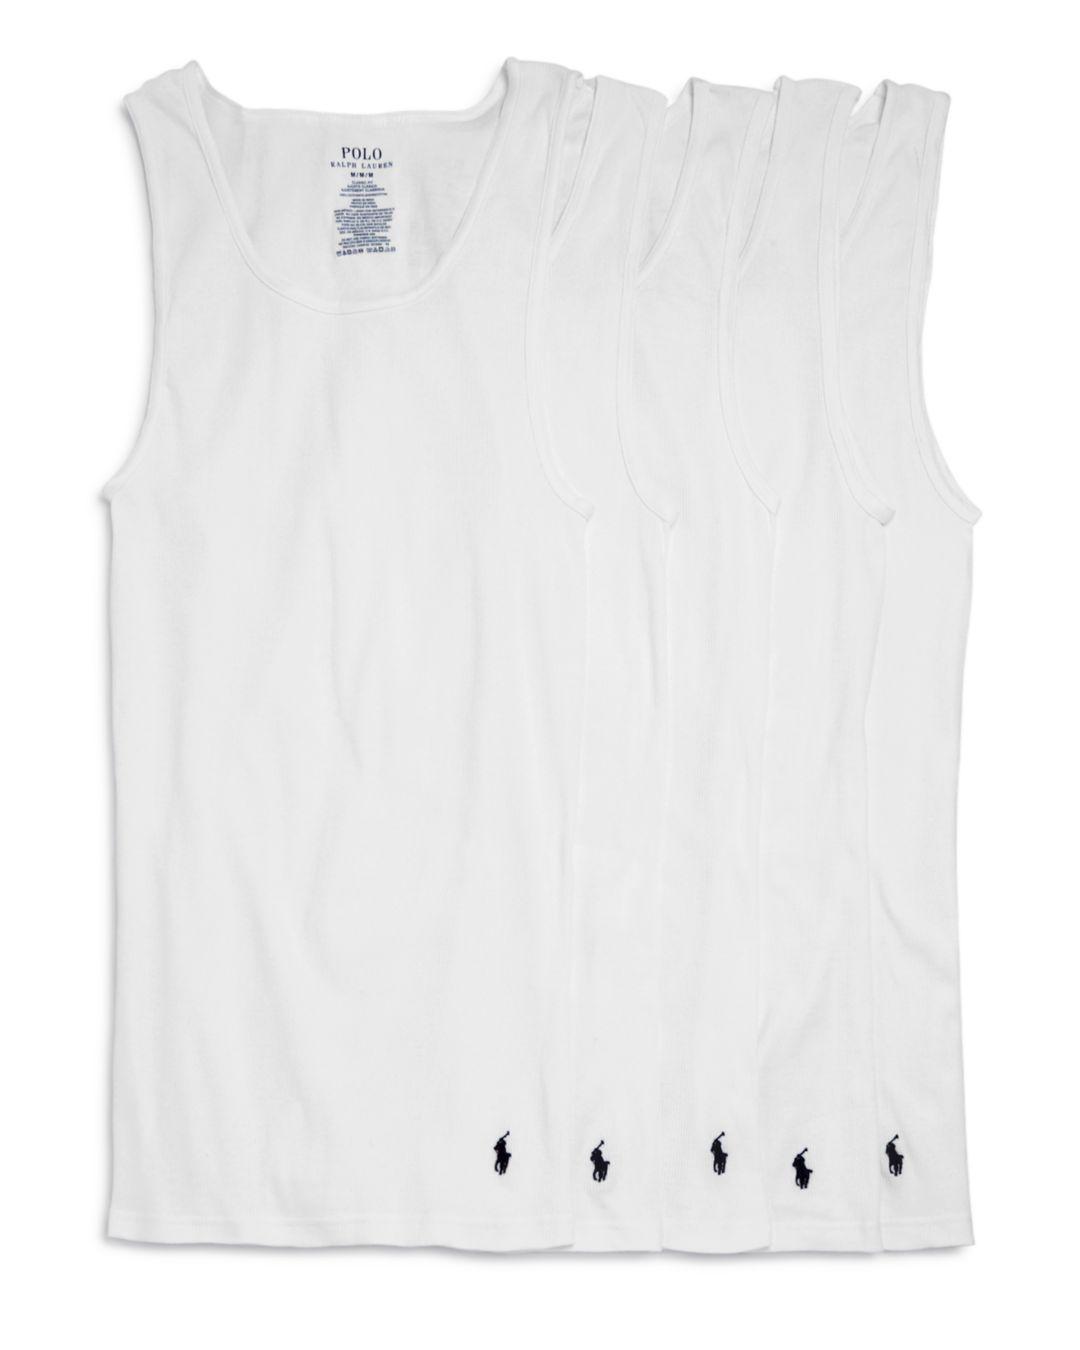 Polo Ralph Lauren Classic Fit Ribbed Tank Top - Pack Of 5 in White for Men  - Lyst